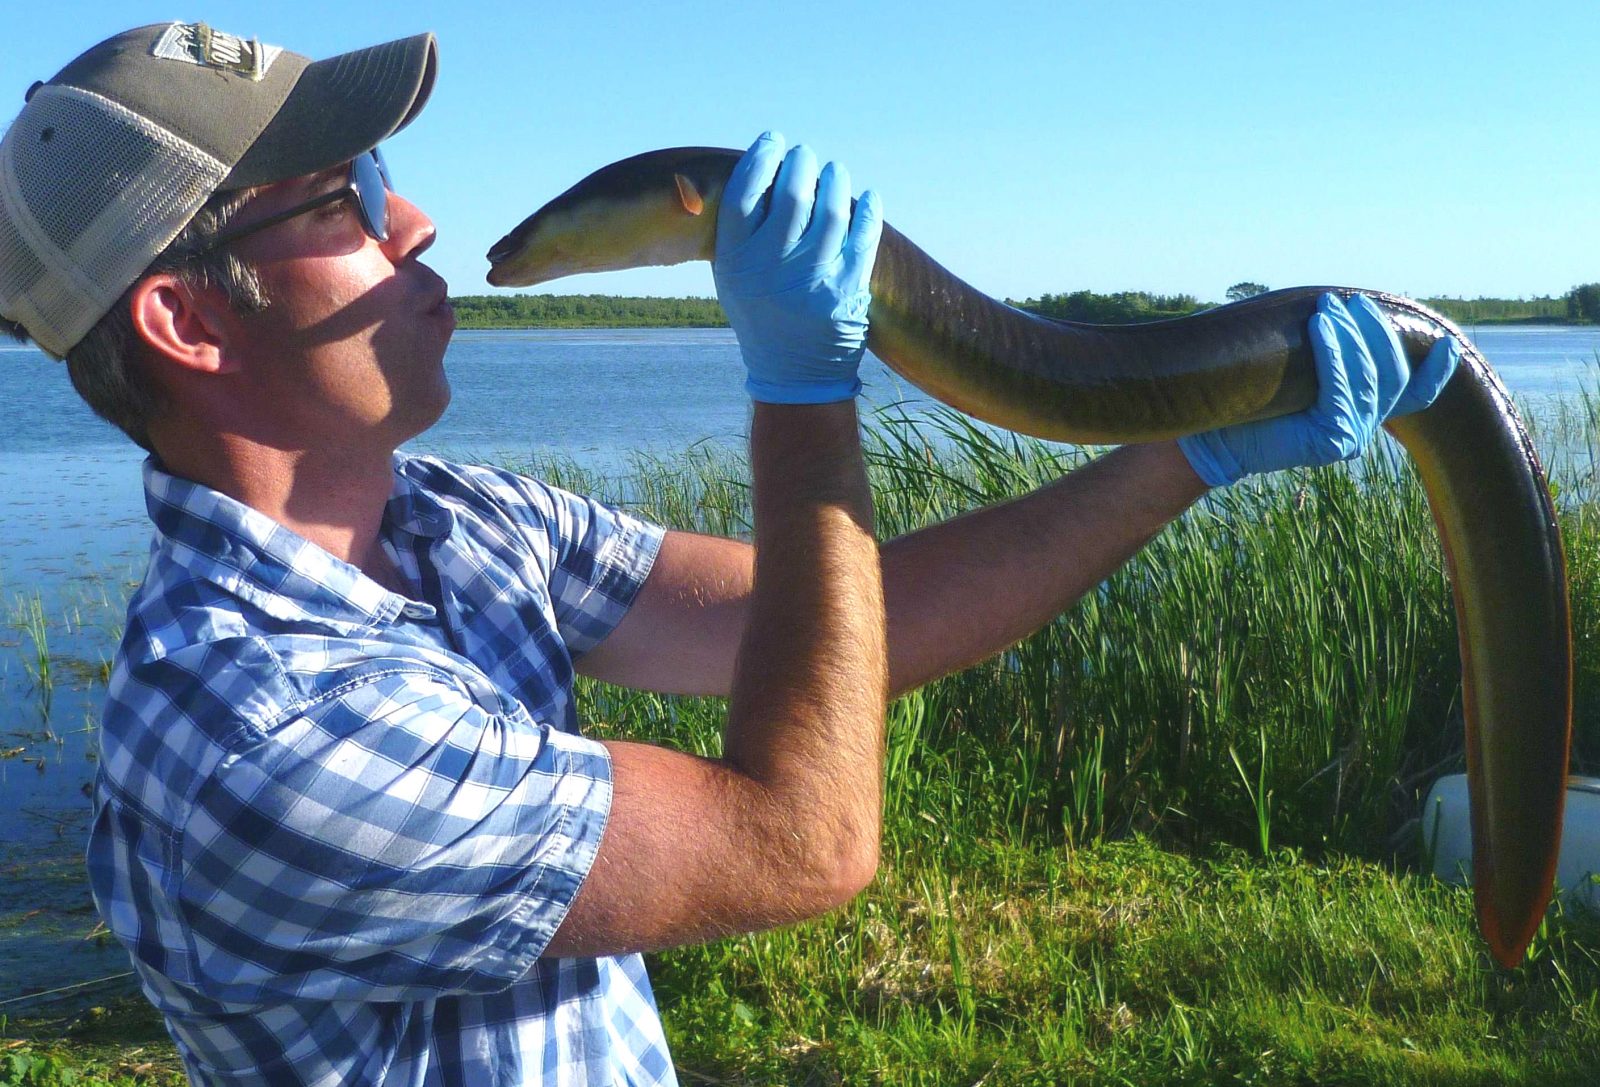 ENDANGERED: American eel numbers in the St. Lawrence River are plummeting